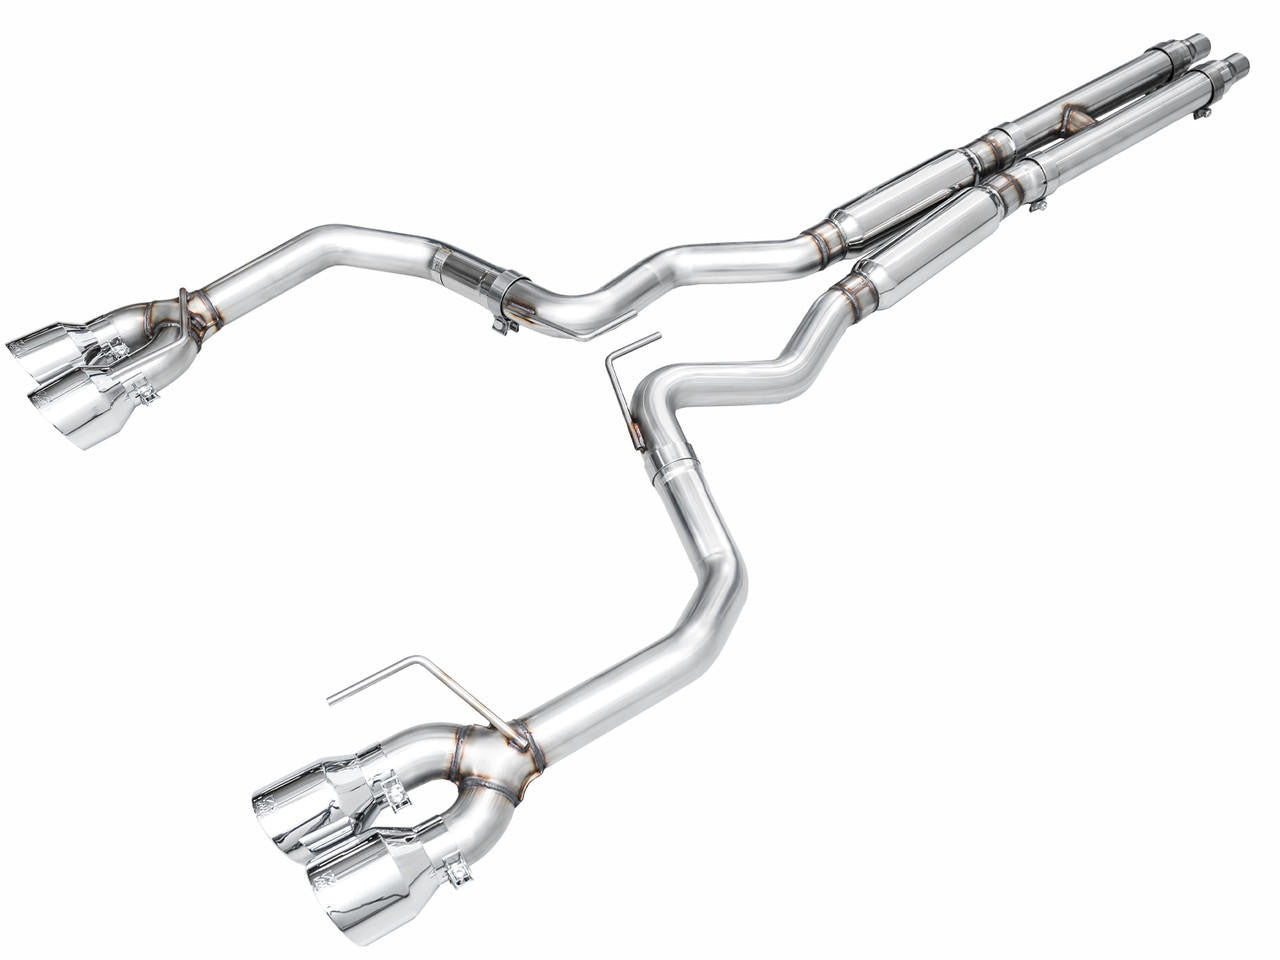 AWE Tuning AWE Track Edition Exhaust for S650 Mustang GT Fastback - Quad Chrome Silver Tips 3020-42650 